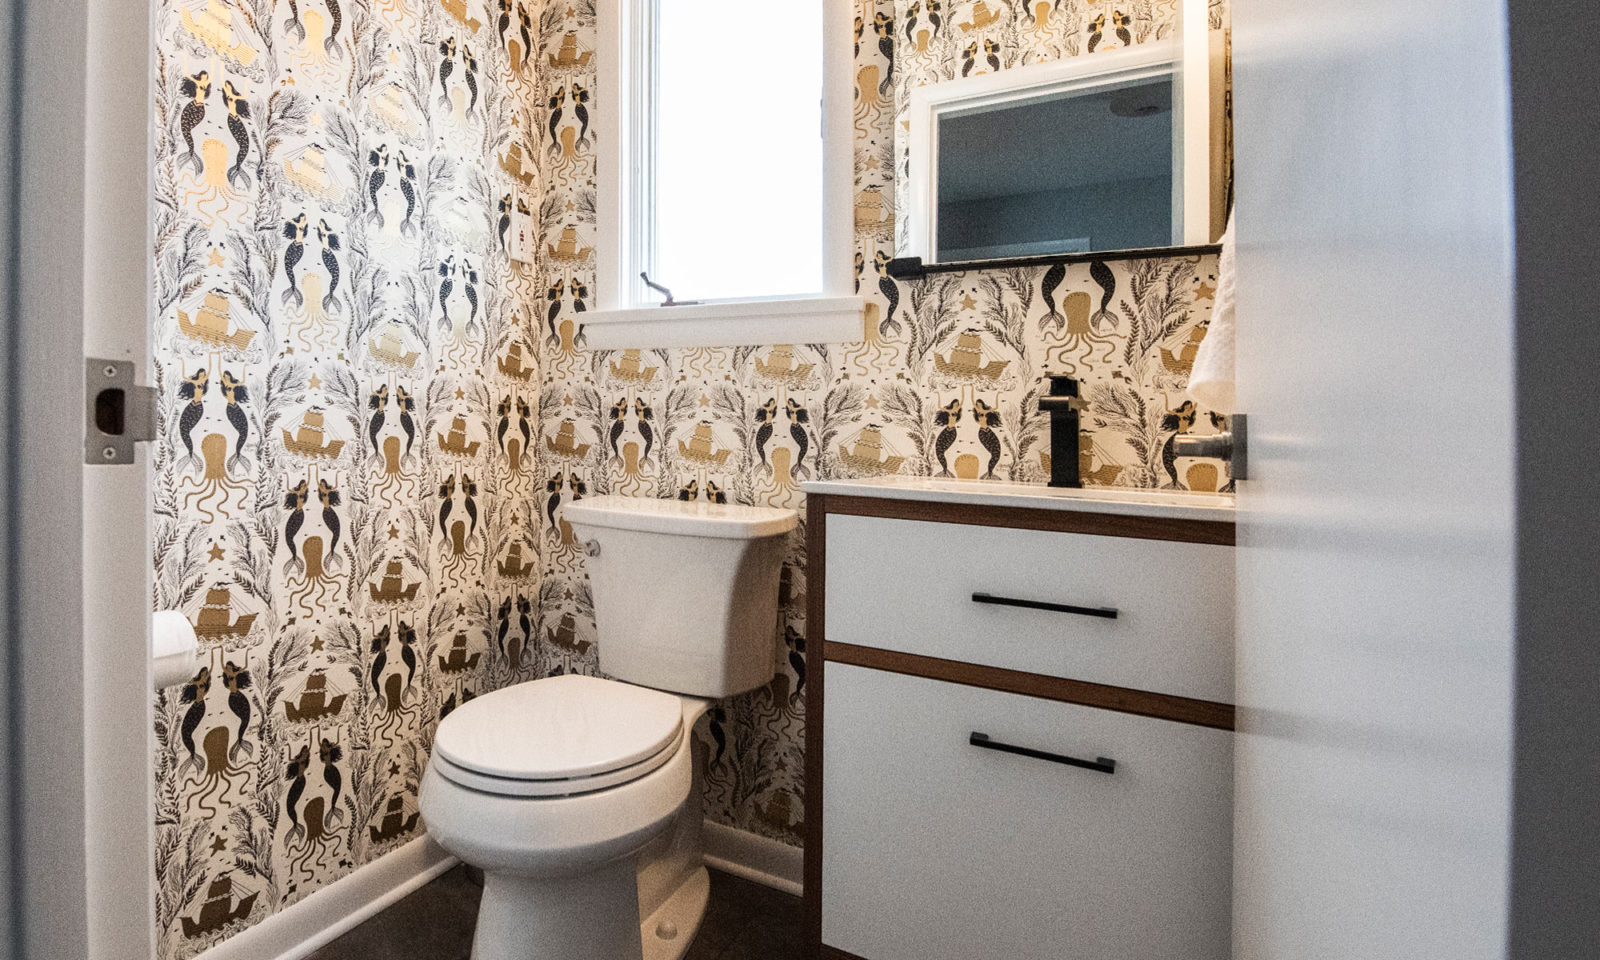 livco powder room remodel patterned wallpaper white and brown cabinets small window